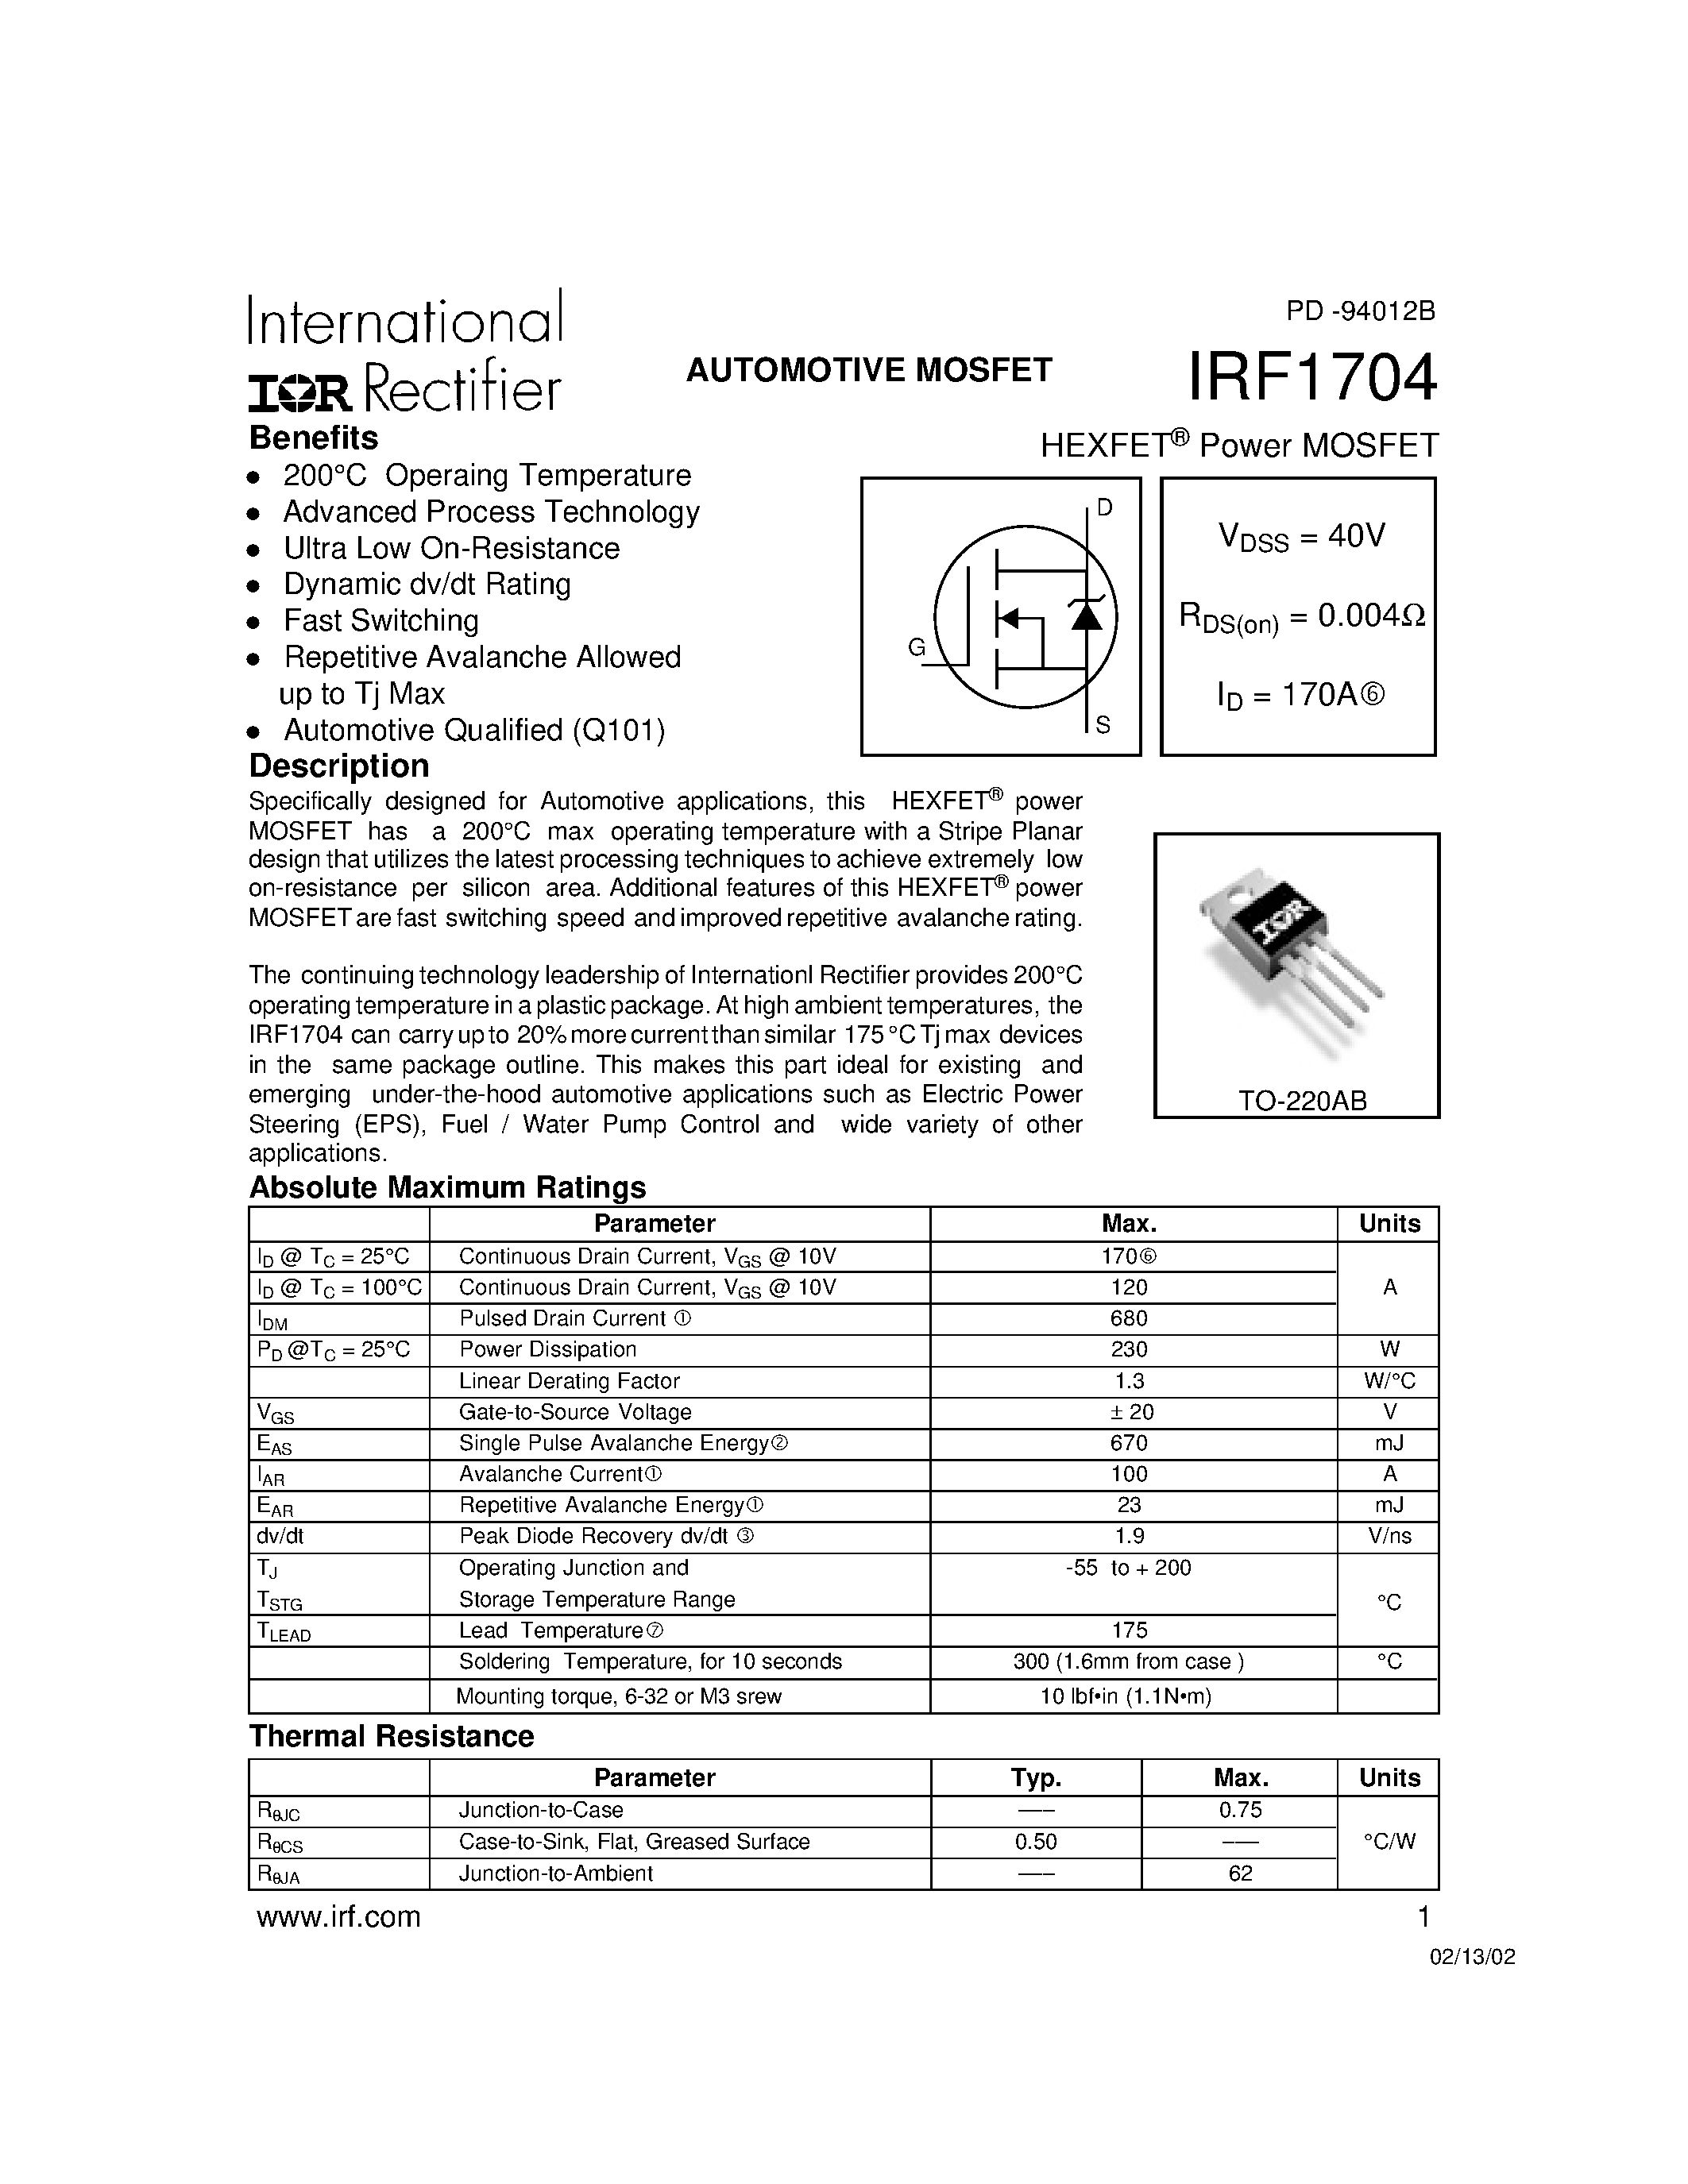 Datasheet IRF1704 - Power MOSFET(Vdss=40V/ Rds(on)=0.004ohm/ Id=170A) page 1